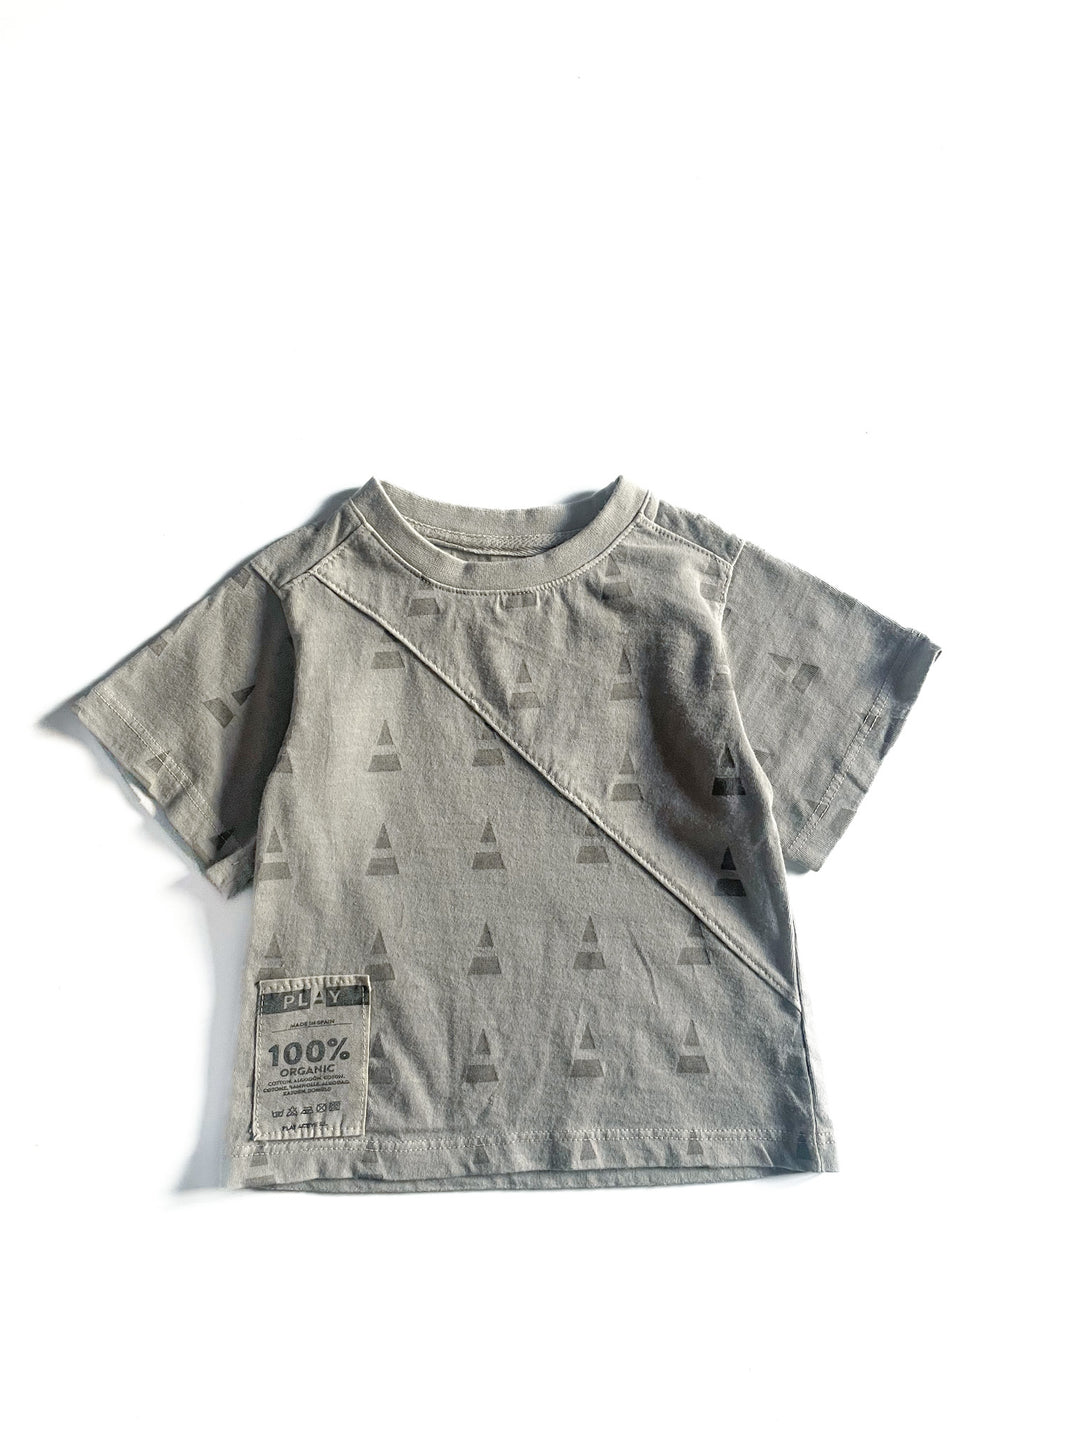 ALL WEATHER PLAY TEE-ALL OVER PLAY